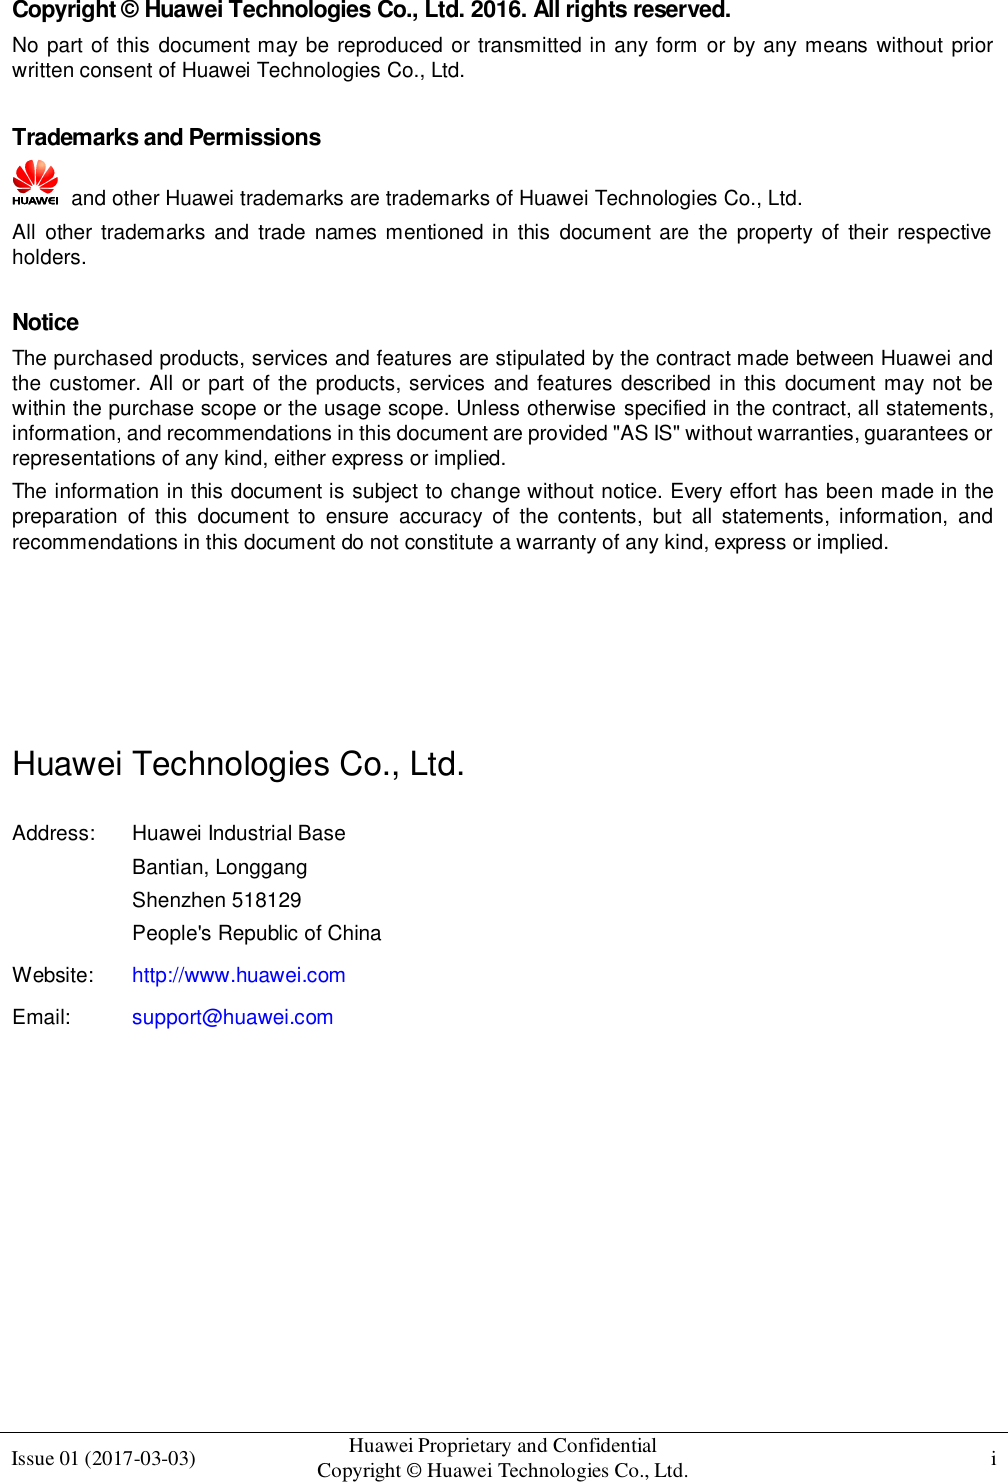  Issue 01 (2017-03-03) Huawei Proprietary and Confidential                                     Copyright © Huawei Technologies Co., Ltd. i    Copyright © Huawei Technologies Co., Ltd. 2016. All rights reserved. No part of this document may be reproduced or transmitted in any form or by any means without prior written consent of Huawei Technologies Co., Ltd.  Trademarks and Permissions   and other Huawei trademarks are trademarks of Huawei Technologies Co., Ltd. All  other trademarks and  trade names mentioned in  this  document are the  property of  their respective holders.  Notice The purchased products, services and features are stipulated by the contract made between Huawei and the customer. All or part of the products, services and features described in this document may not be within the purchase scope or the usage scope. Unless otherwise specified in the contract, all statements, information, and recommendations in this document are provided &quot;AS IS&quot; without warranties, guarantees or representations of any kind, either express or implied. The information in this document is subject to change without notice. Every effort has been made in the preparation  of  this  document  to  ensure  accuracy  of  the  contents,  but  all  statements,  information,  and recommendations in this document do not constitute a warranty of any kind, express or implied.     Huawei Technologies Co., Ltd. Address: Huawei Industrial Base Bantian, Longgang Shenzhen 518129 People&apos;s Republic of China Website: http://www.huawei.com Email: support@huawei.com          